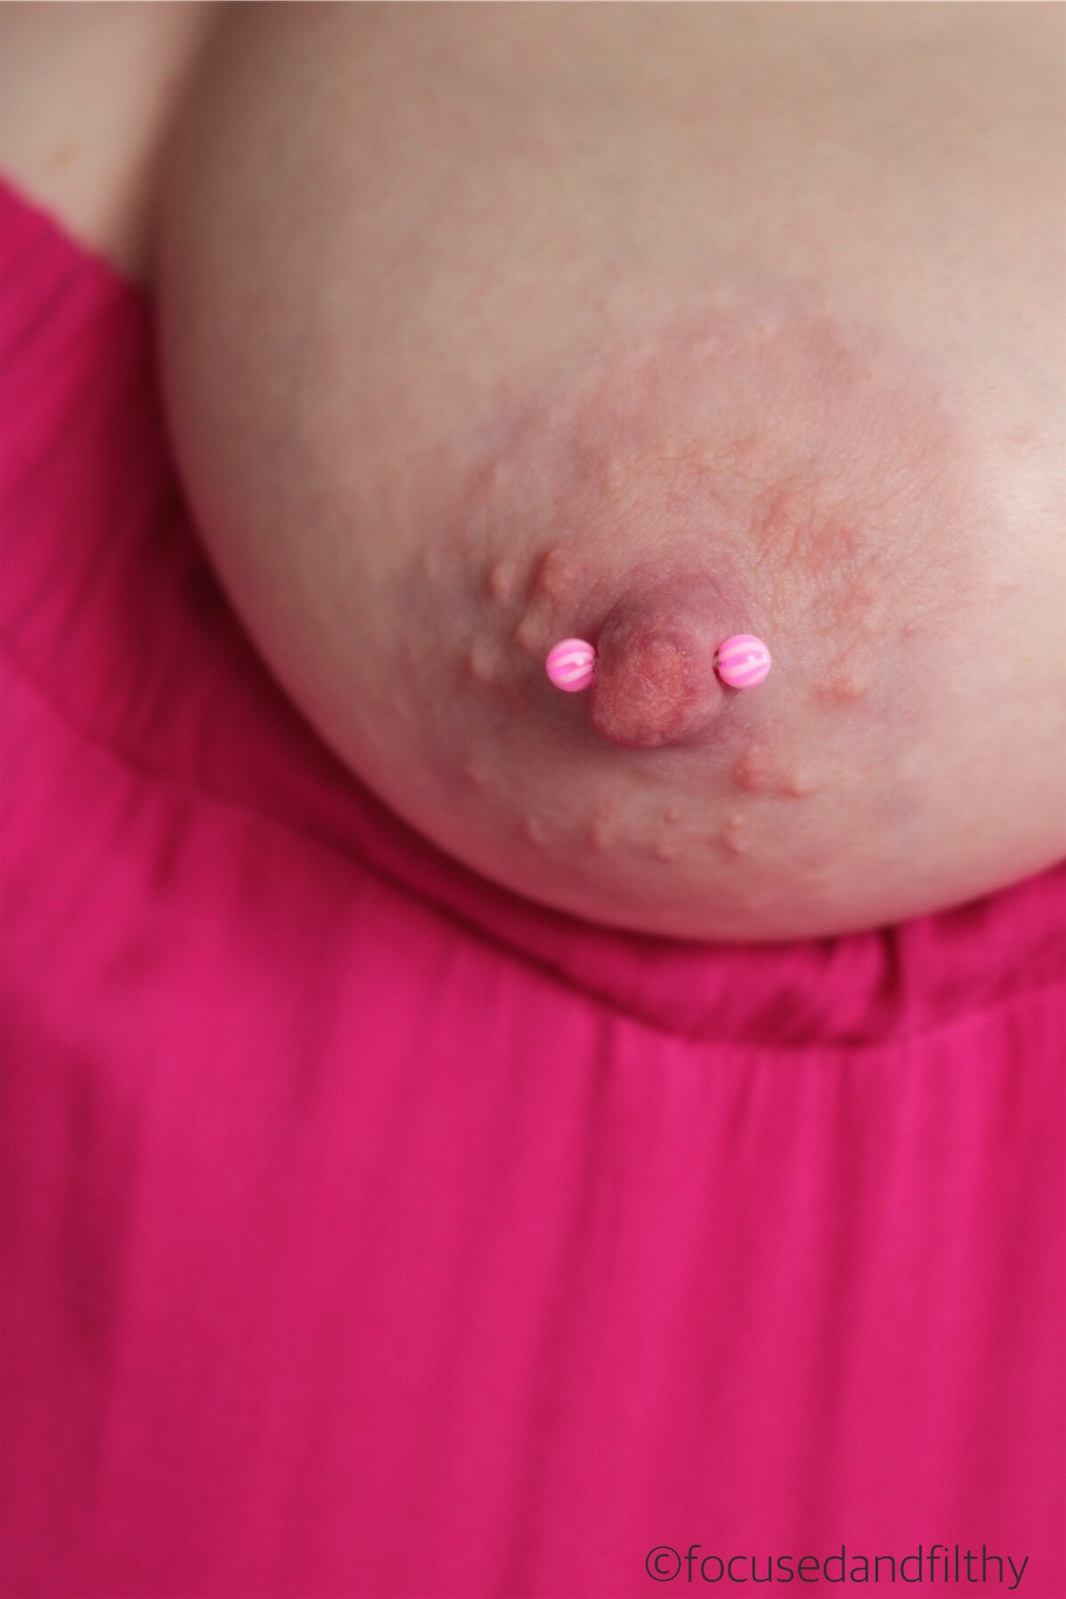 Colour close up photograph of a left breast and nipple which has a pink cAn...